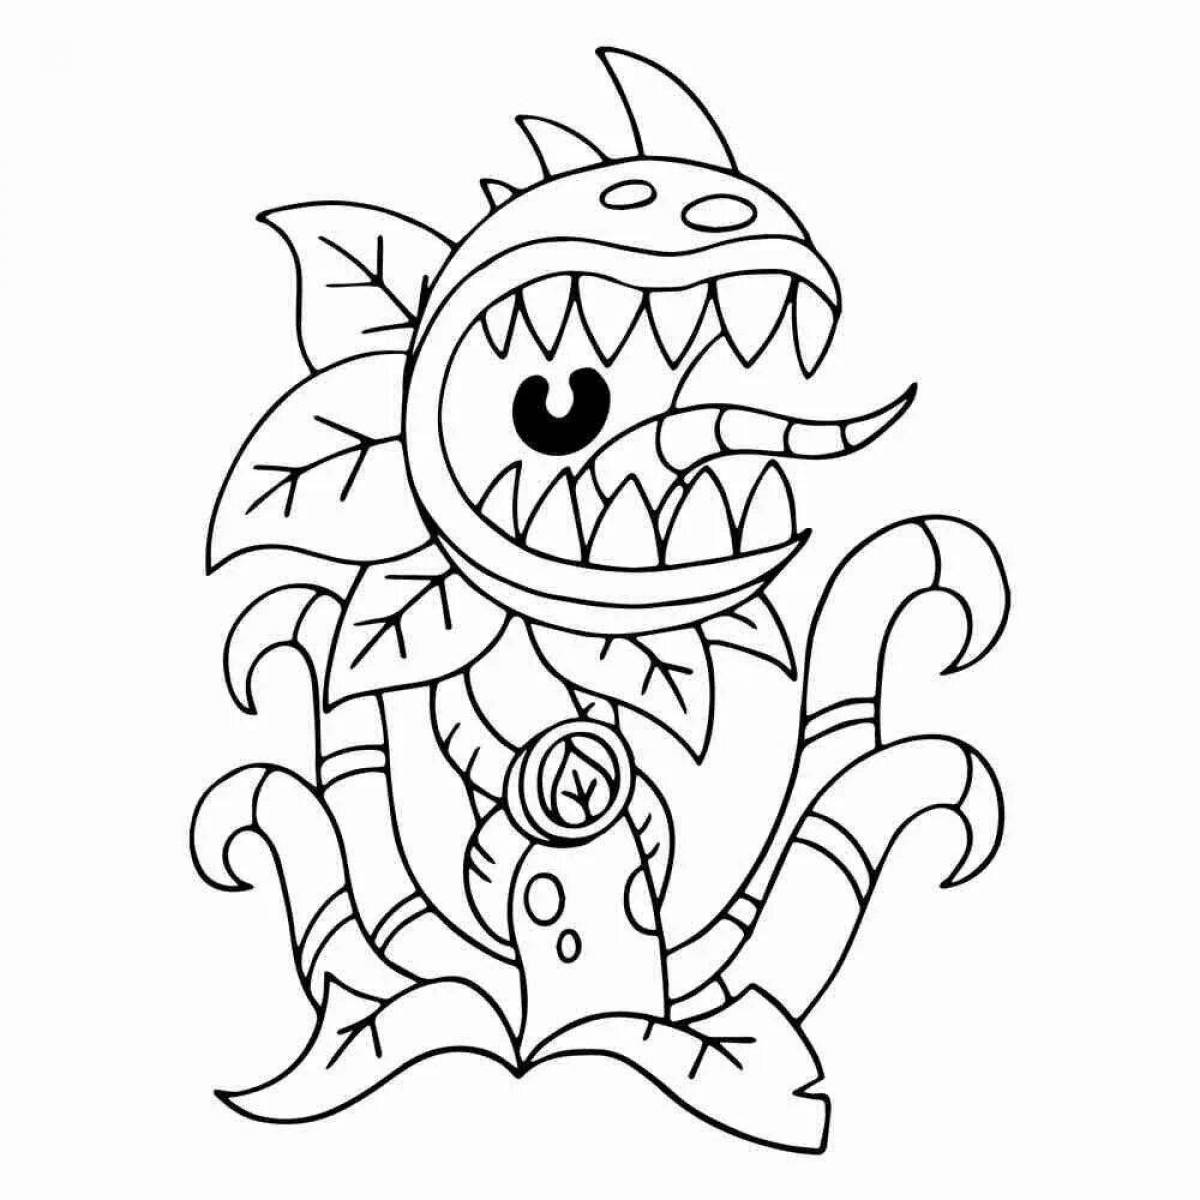 Dazzling zombies vs plants 3 coloring book